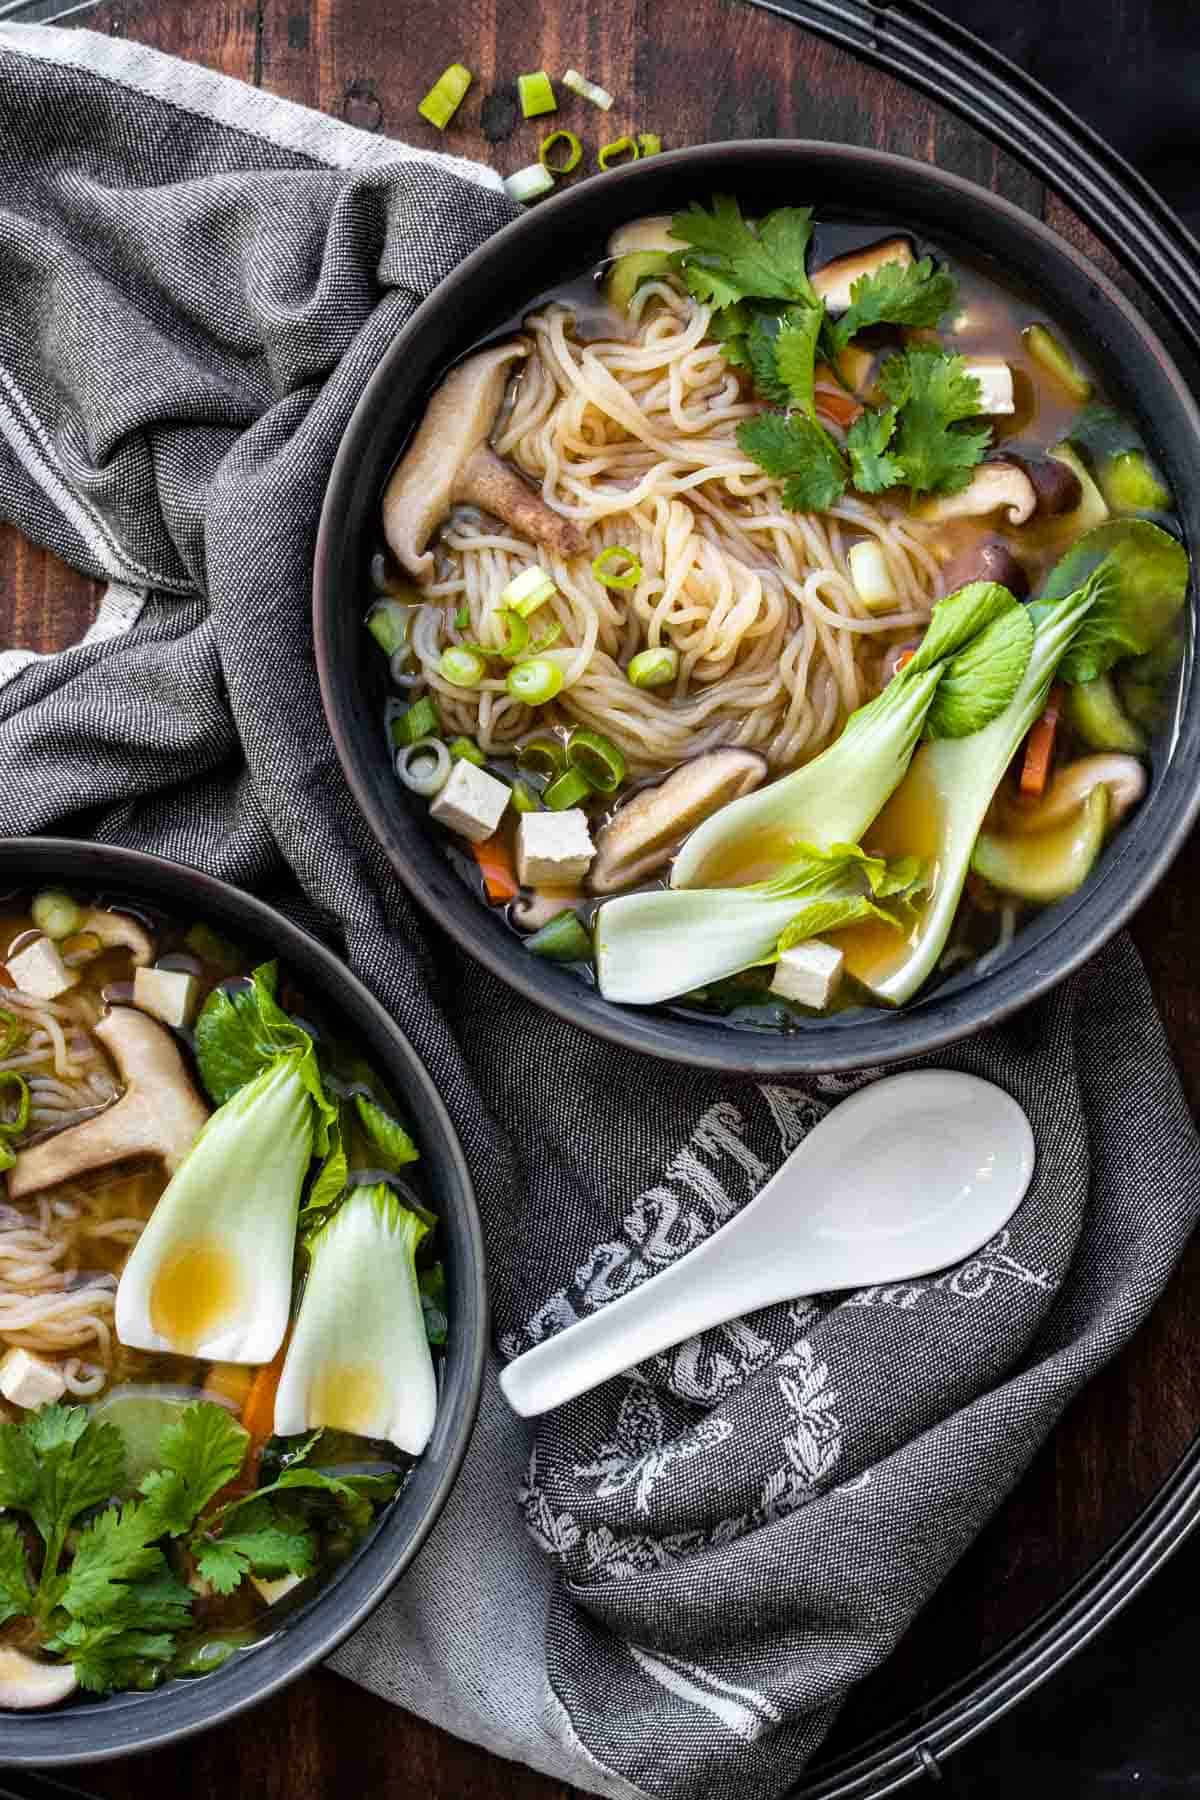 Two bowls of veggies and noodle soup on a wooden table